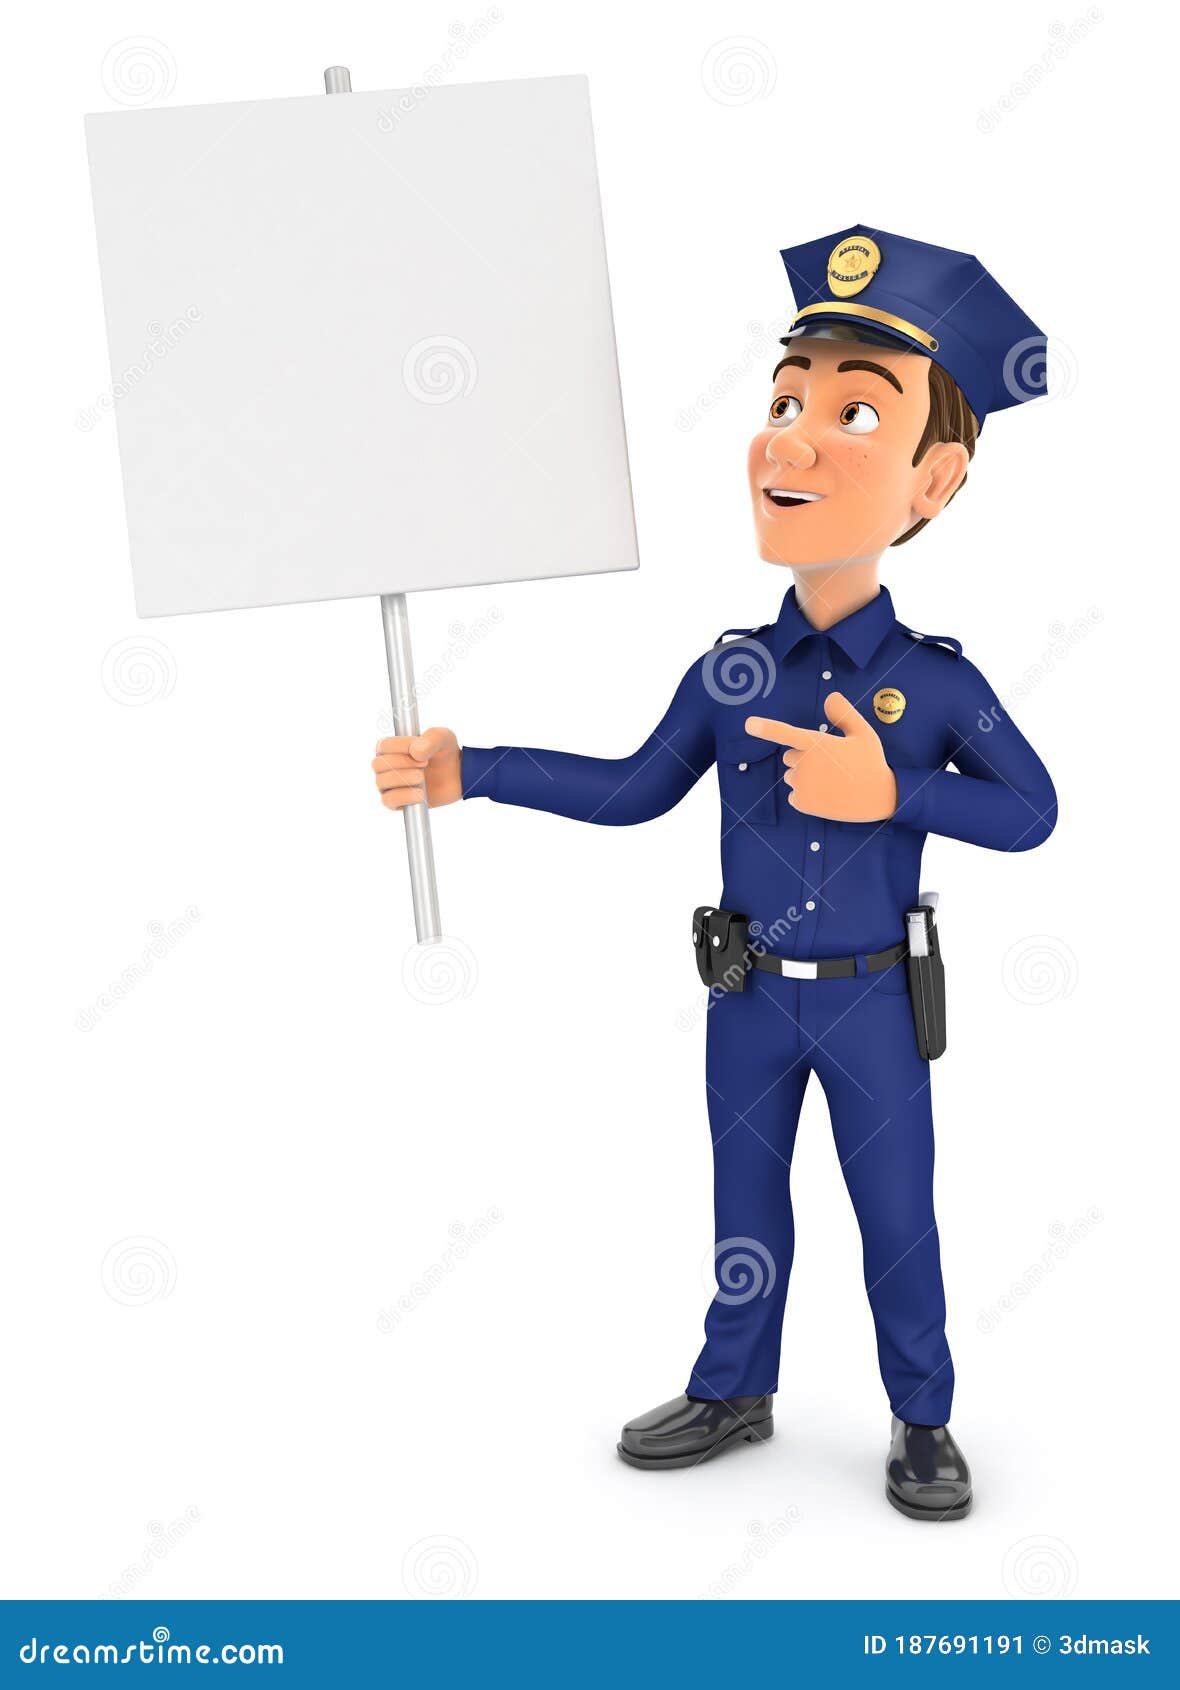 Policeman Holding Stop Sign And Showing Stop Gesture Warning About The